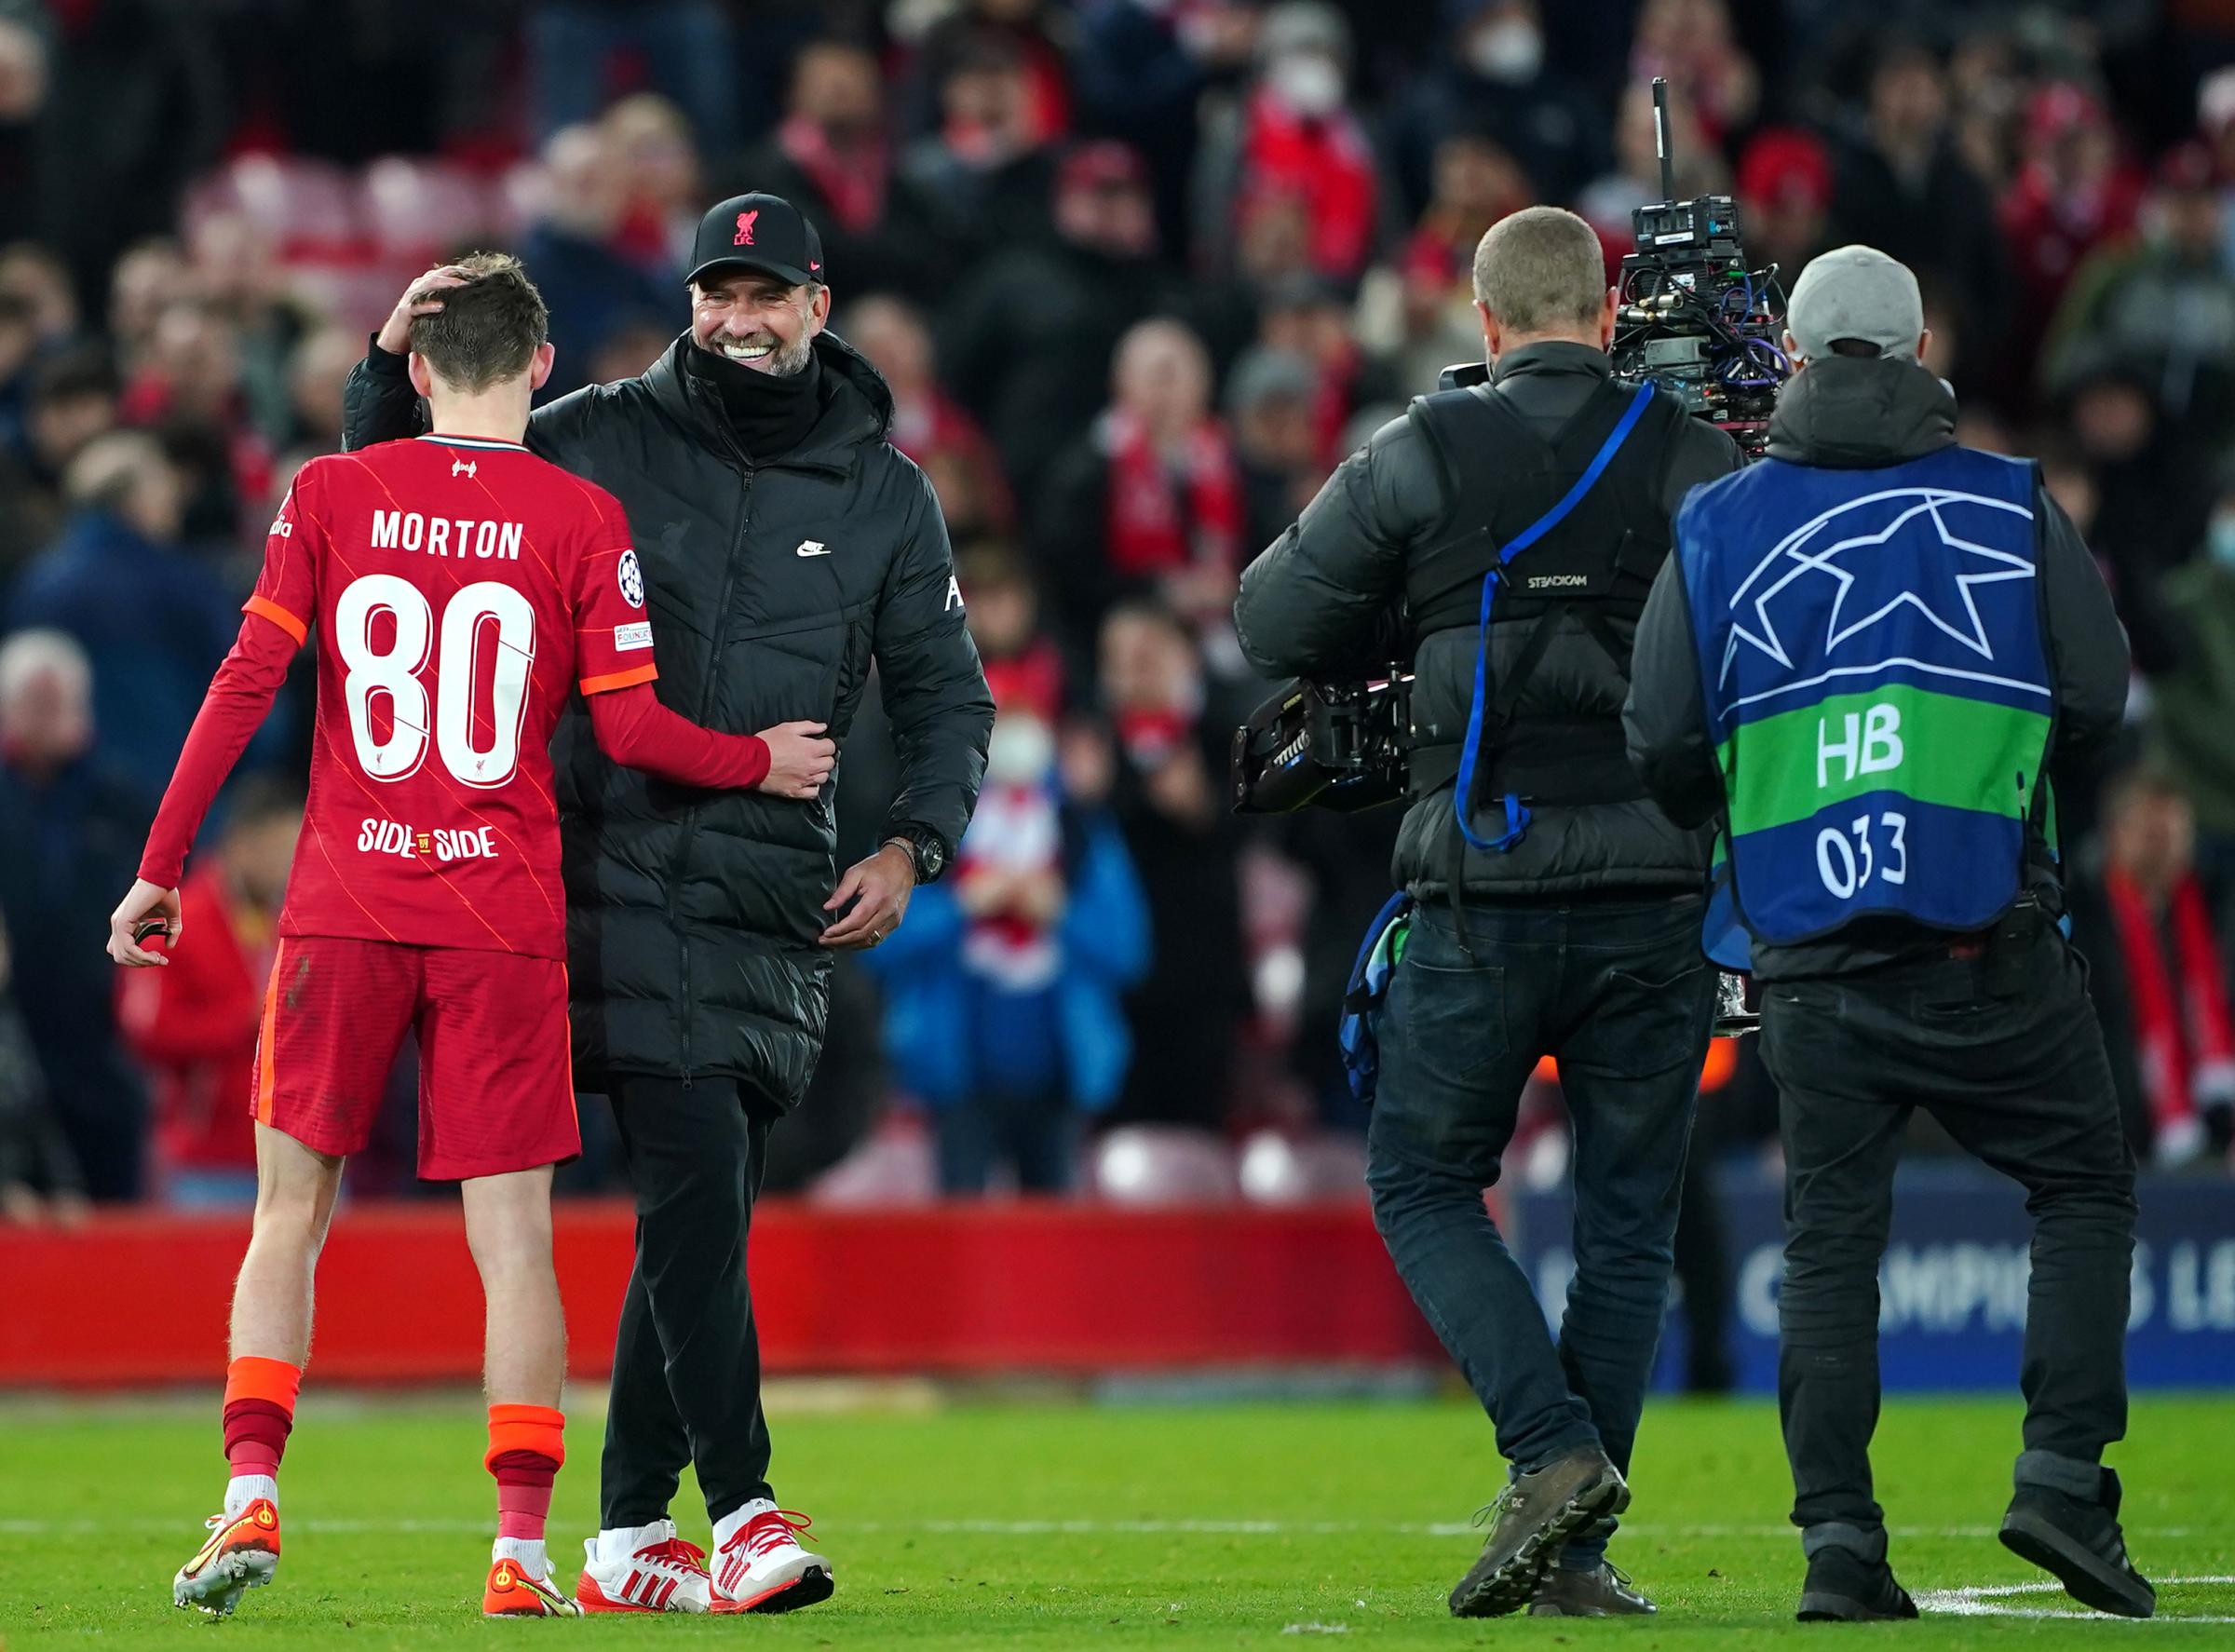 Liverpool manager Jurgen Klopp (right) greets Tyler Morton after the final whistle during the UEFA Champions League, Group B match against Porto at Anfield. Photo: Peter Byrne / PA